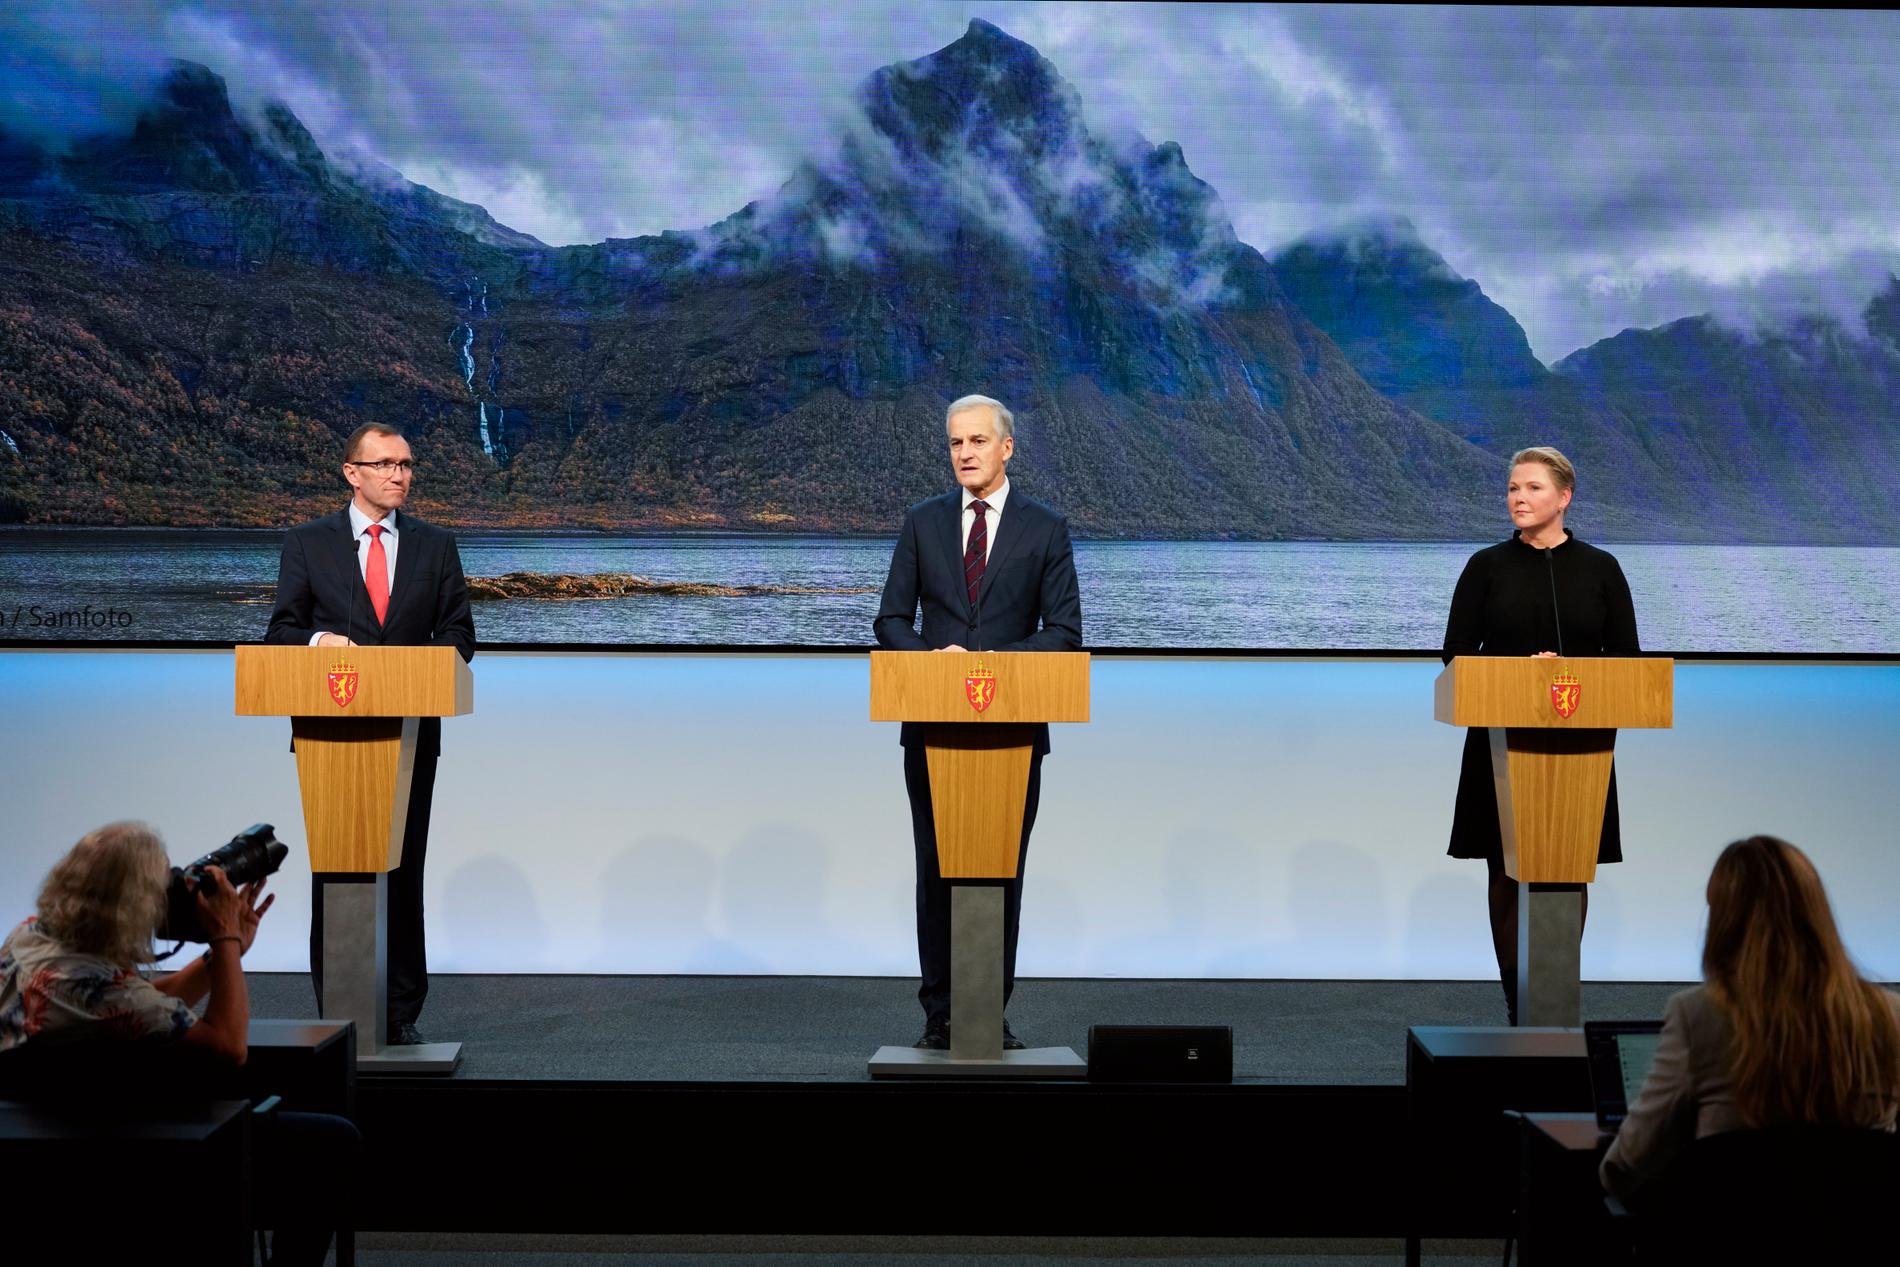 Environmentalists fear Norway oil deal at climate summit - E24